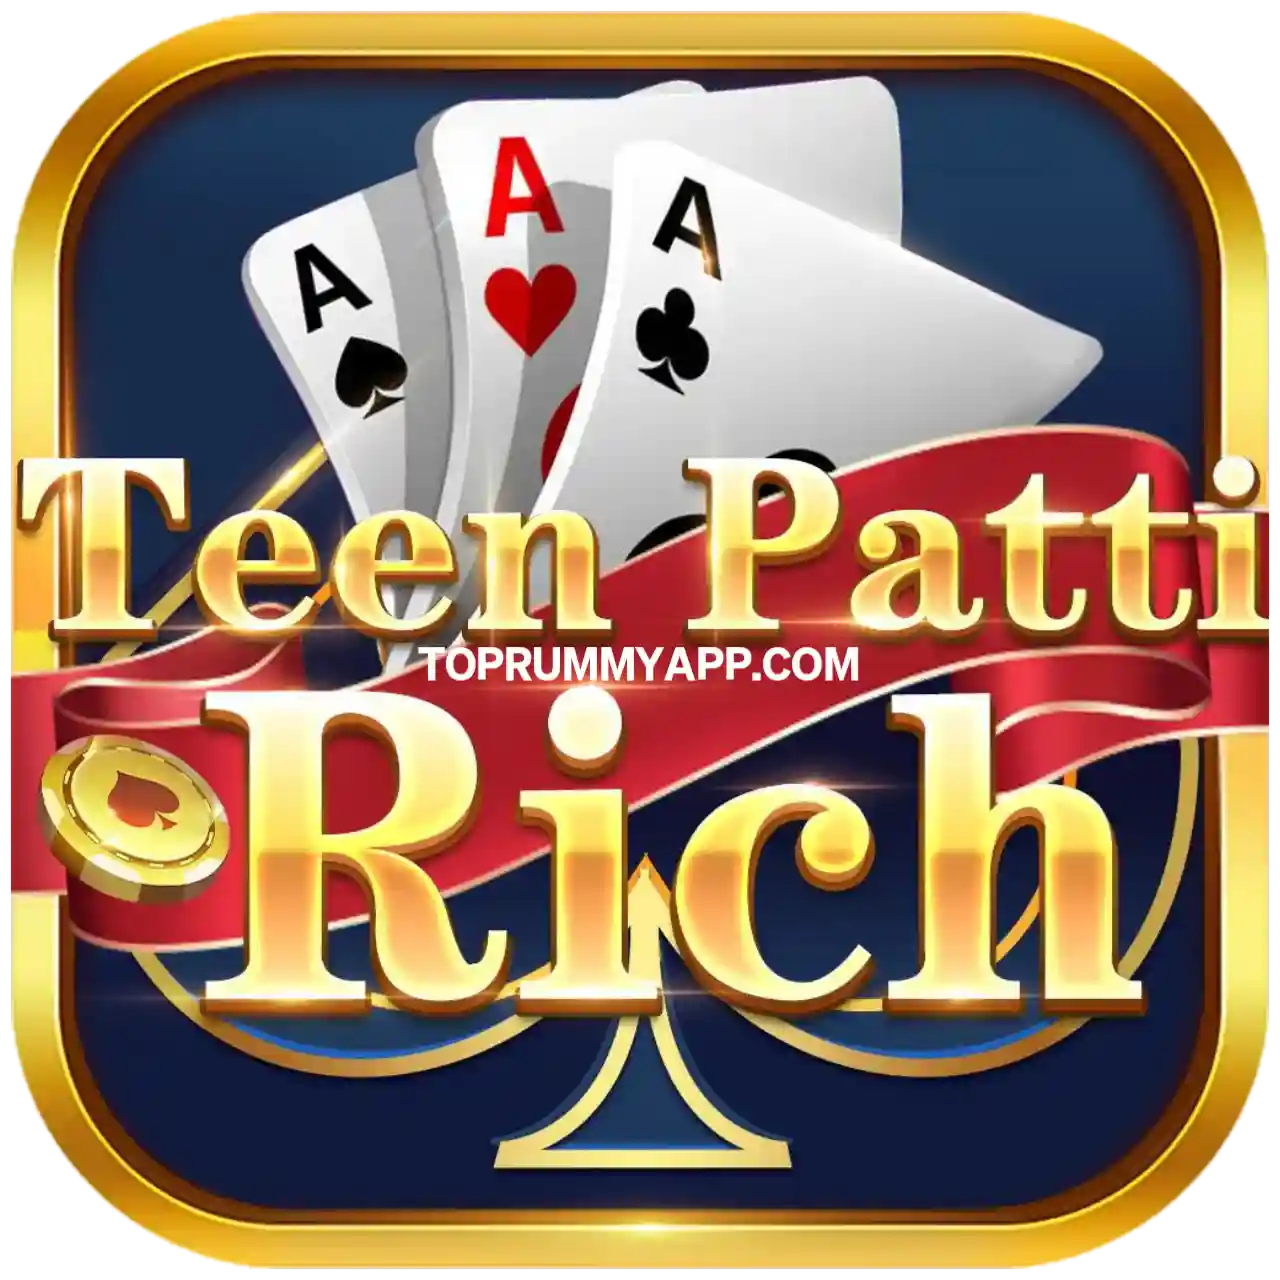 Teen Patti Rich App Download All 7 Up Down Earning App